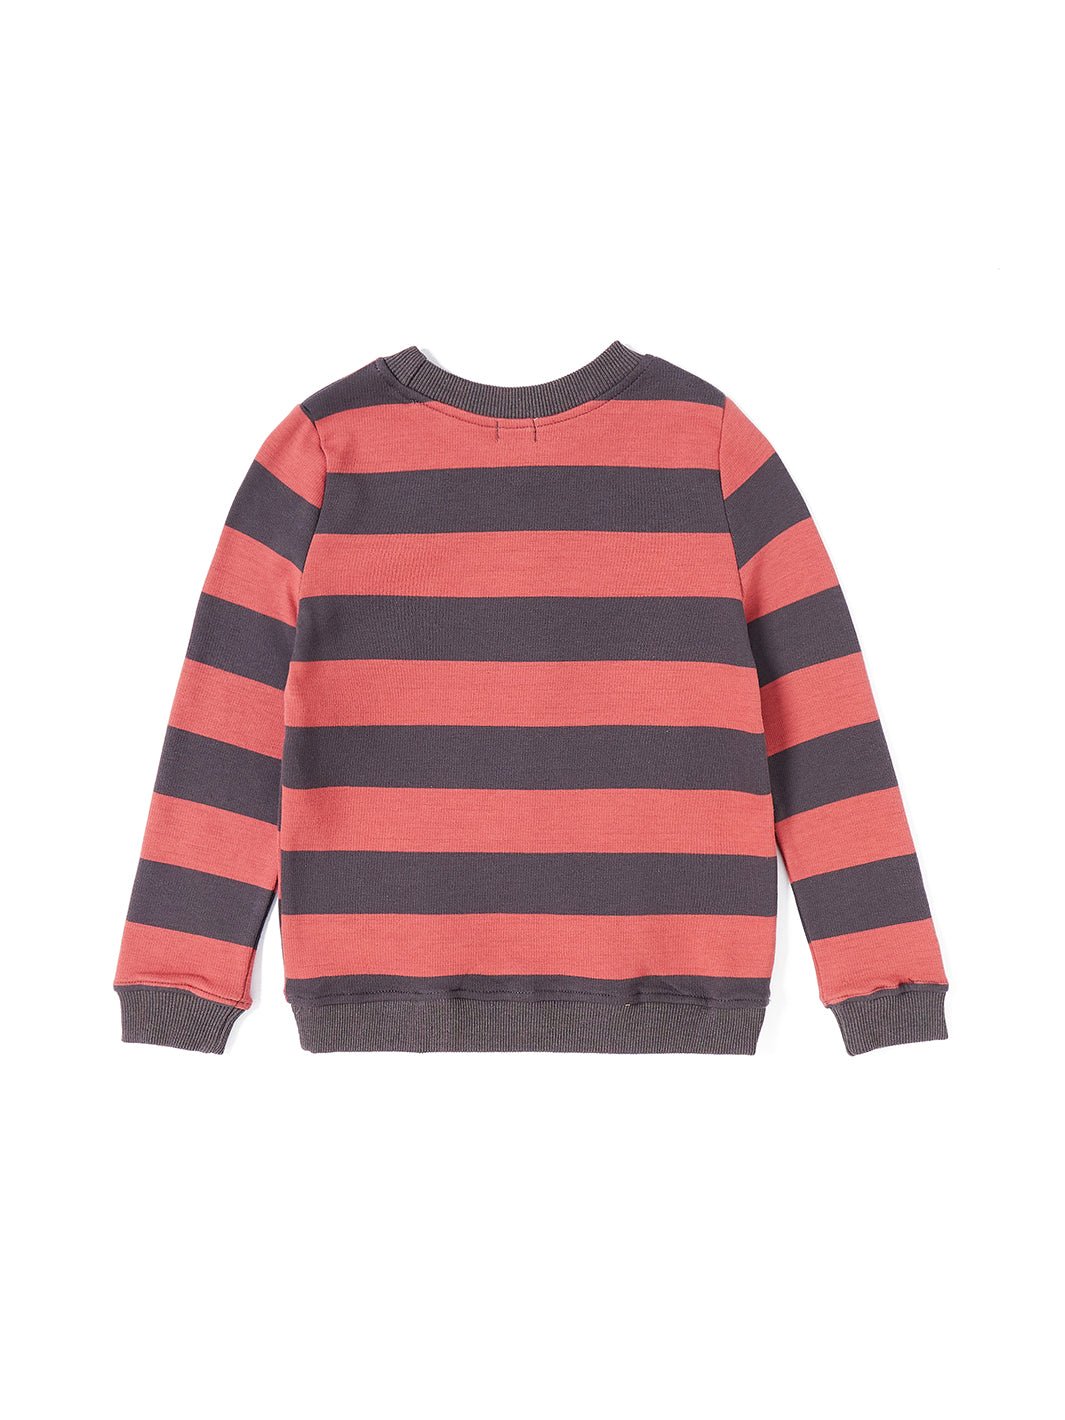 Thick Stripe Top - Rust